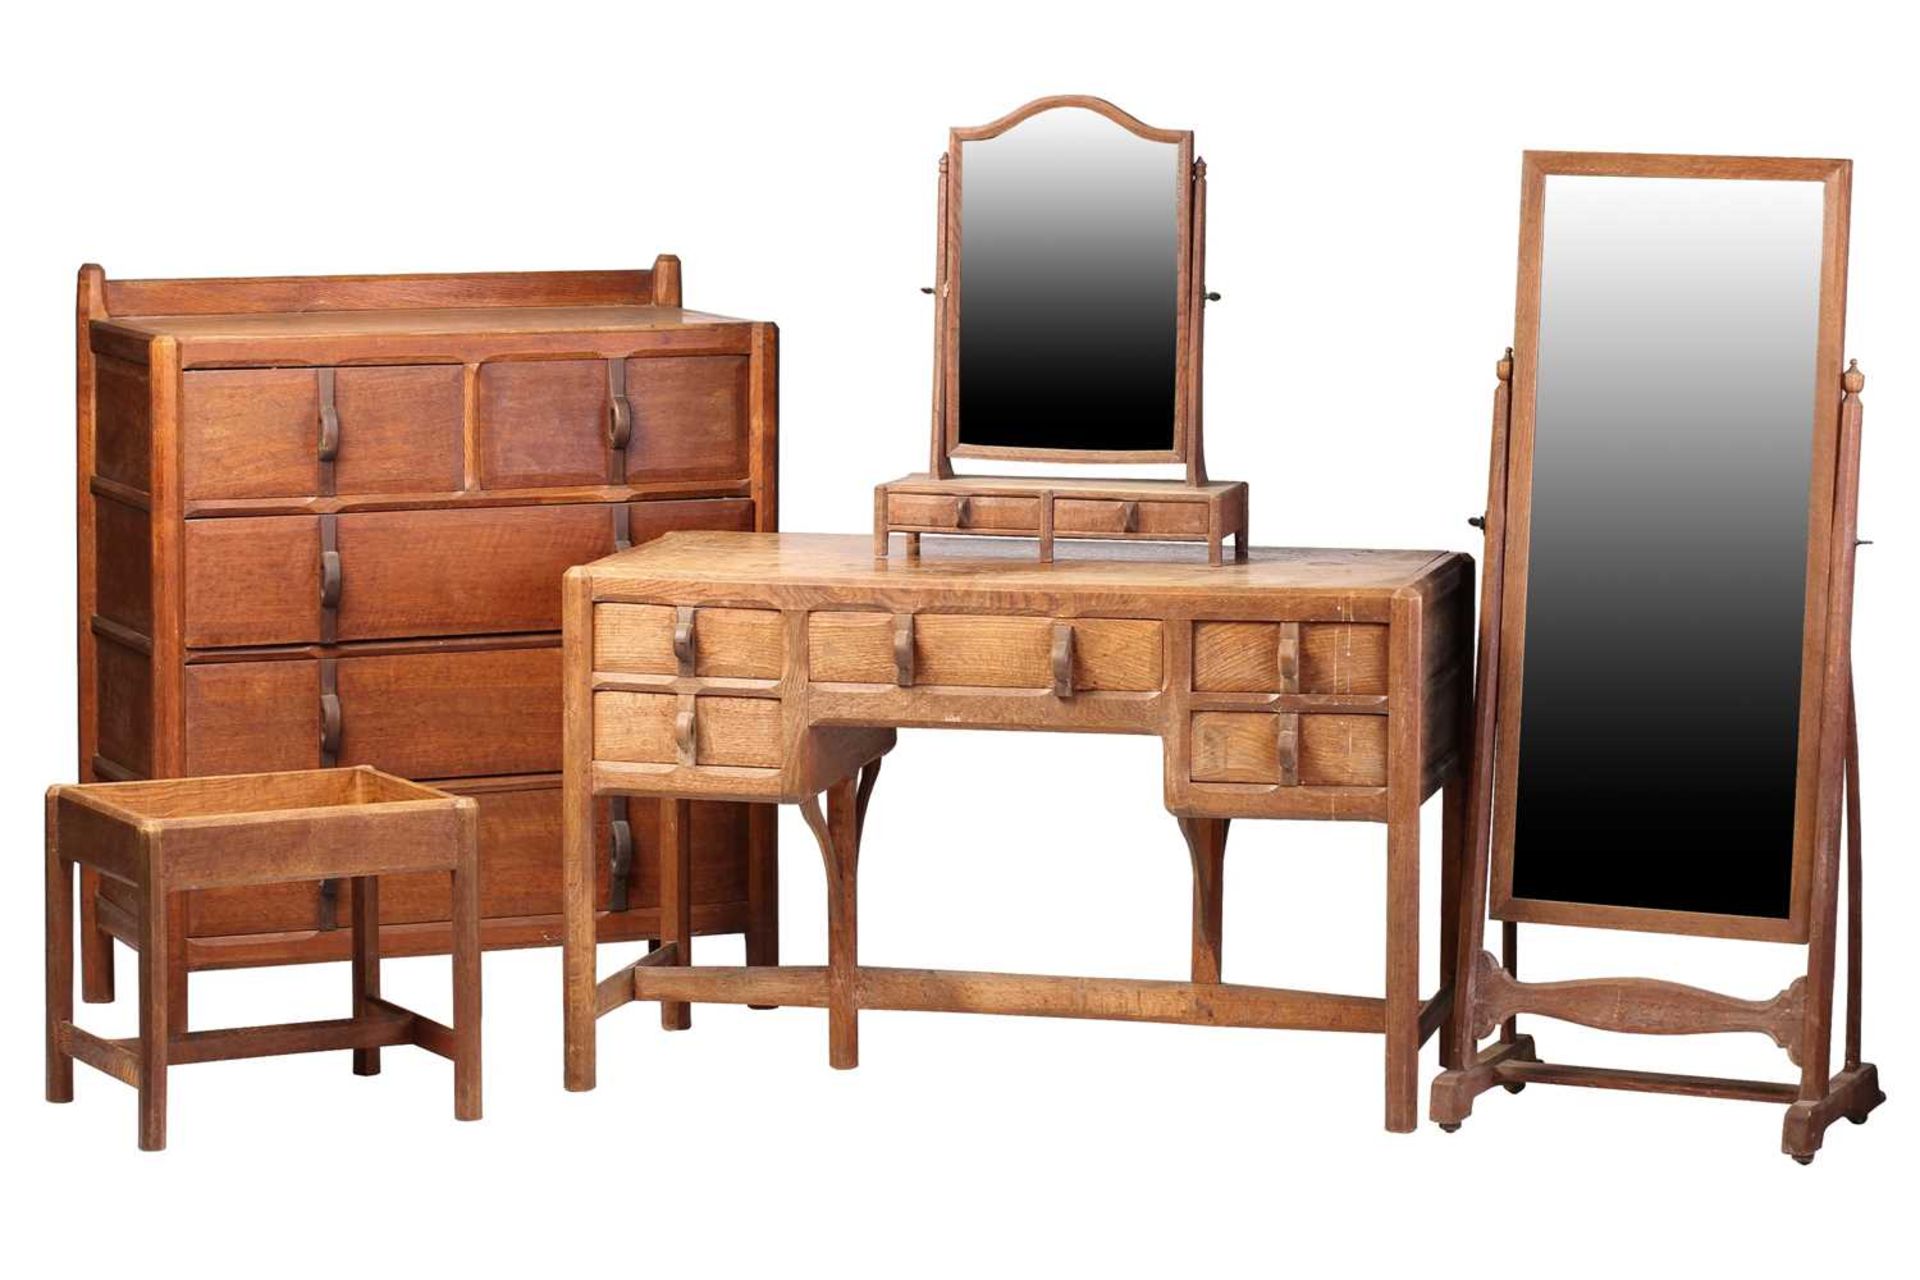 A Gordon Russell bedroom suite in English brown oak, c.1925, comprising: a dressing table with